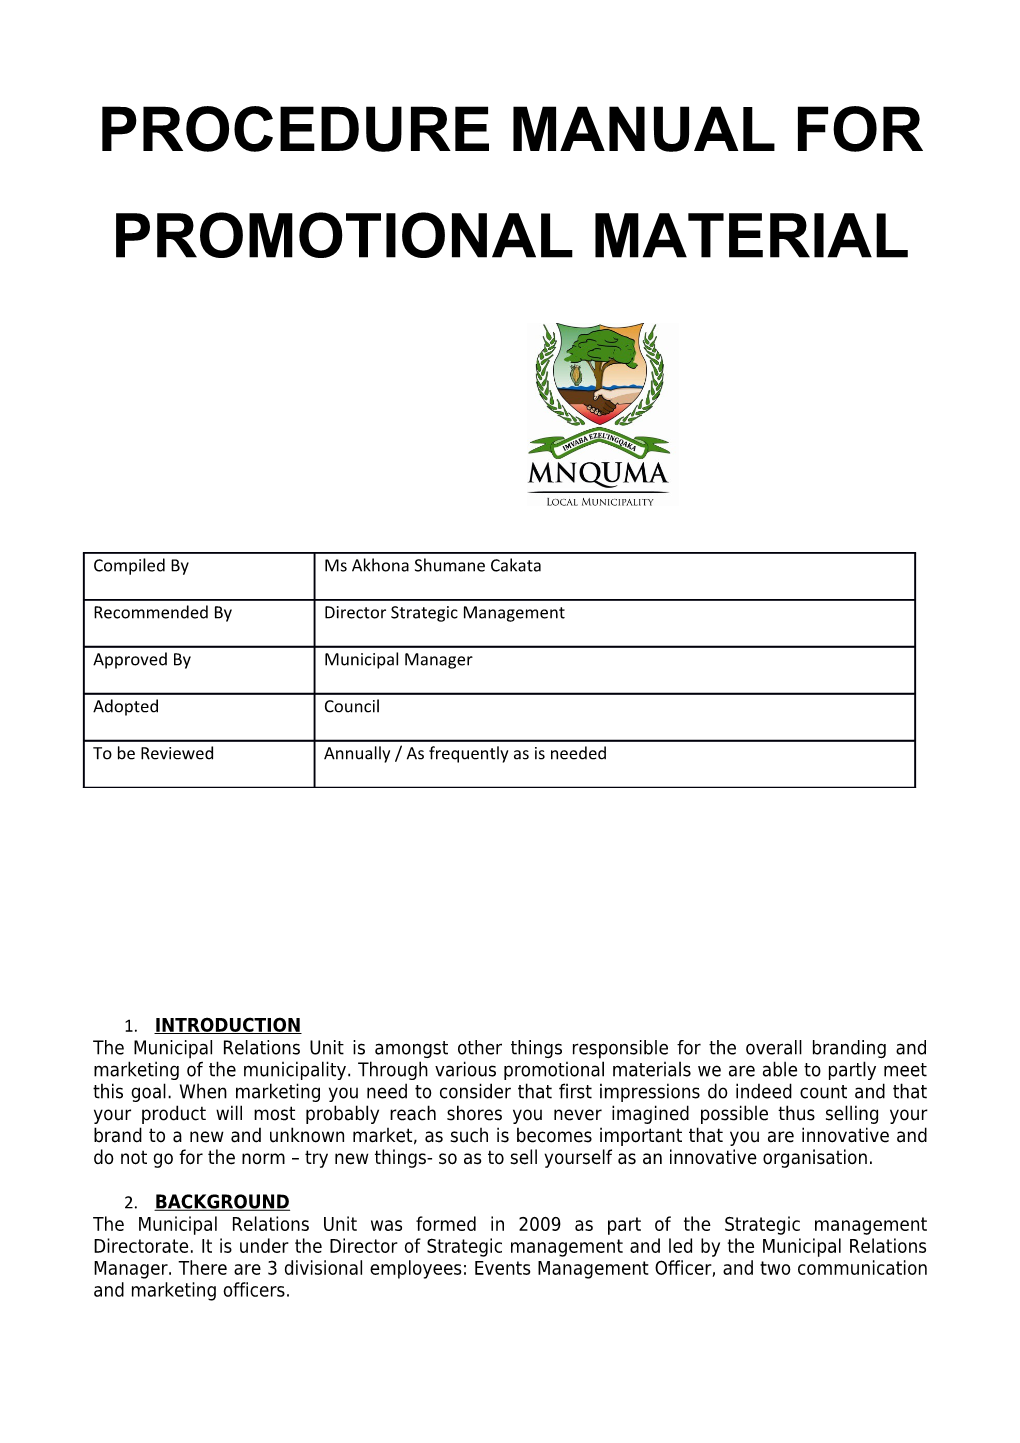 Procedure Manual for Promotional Material